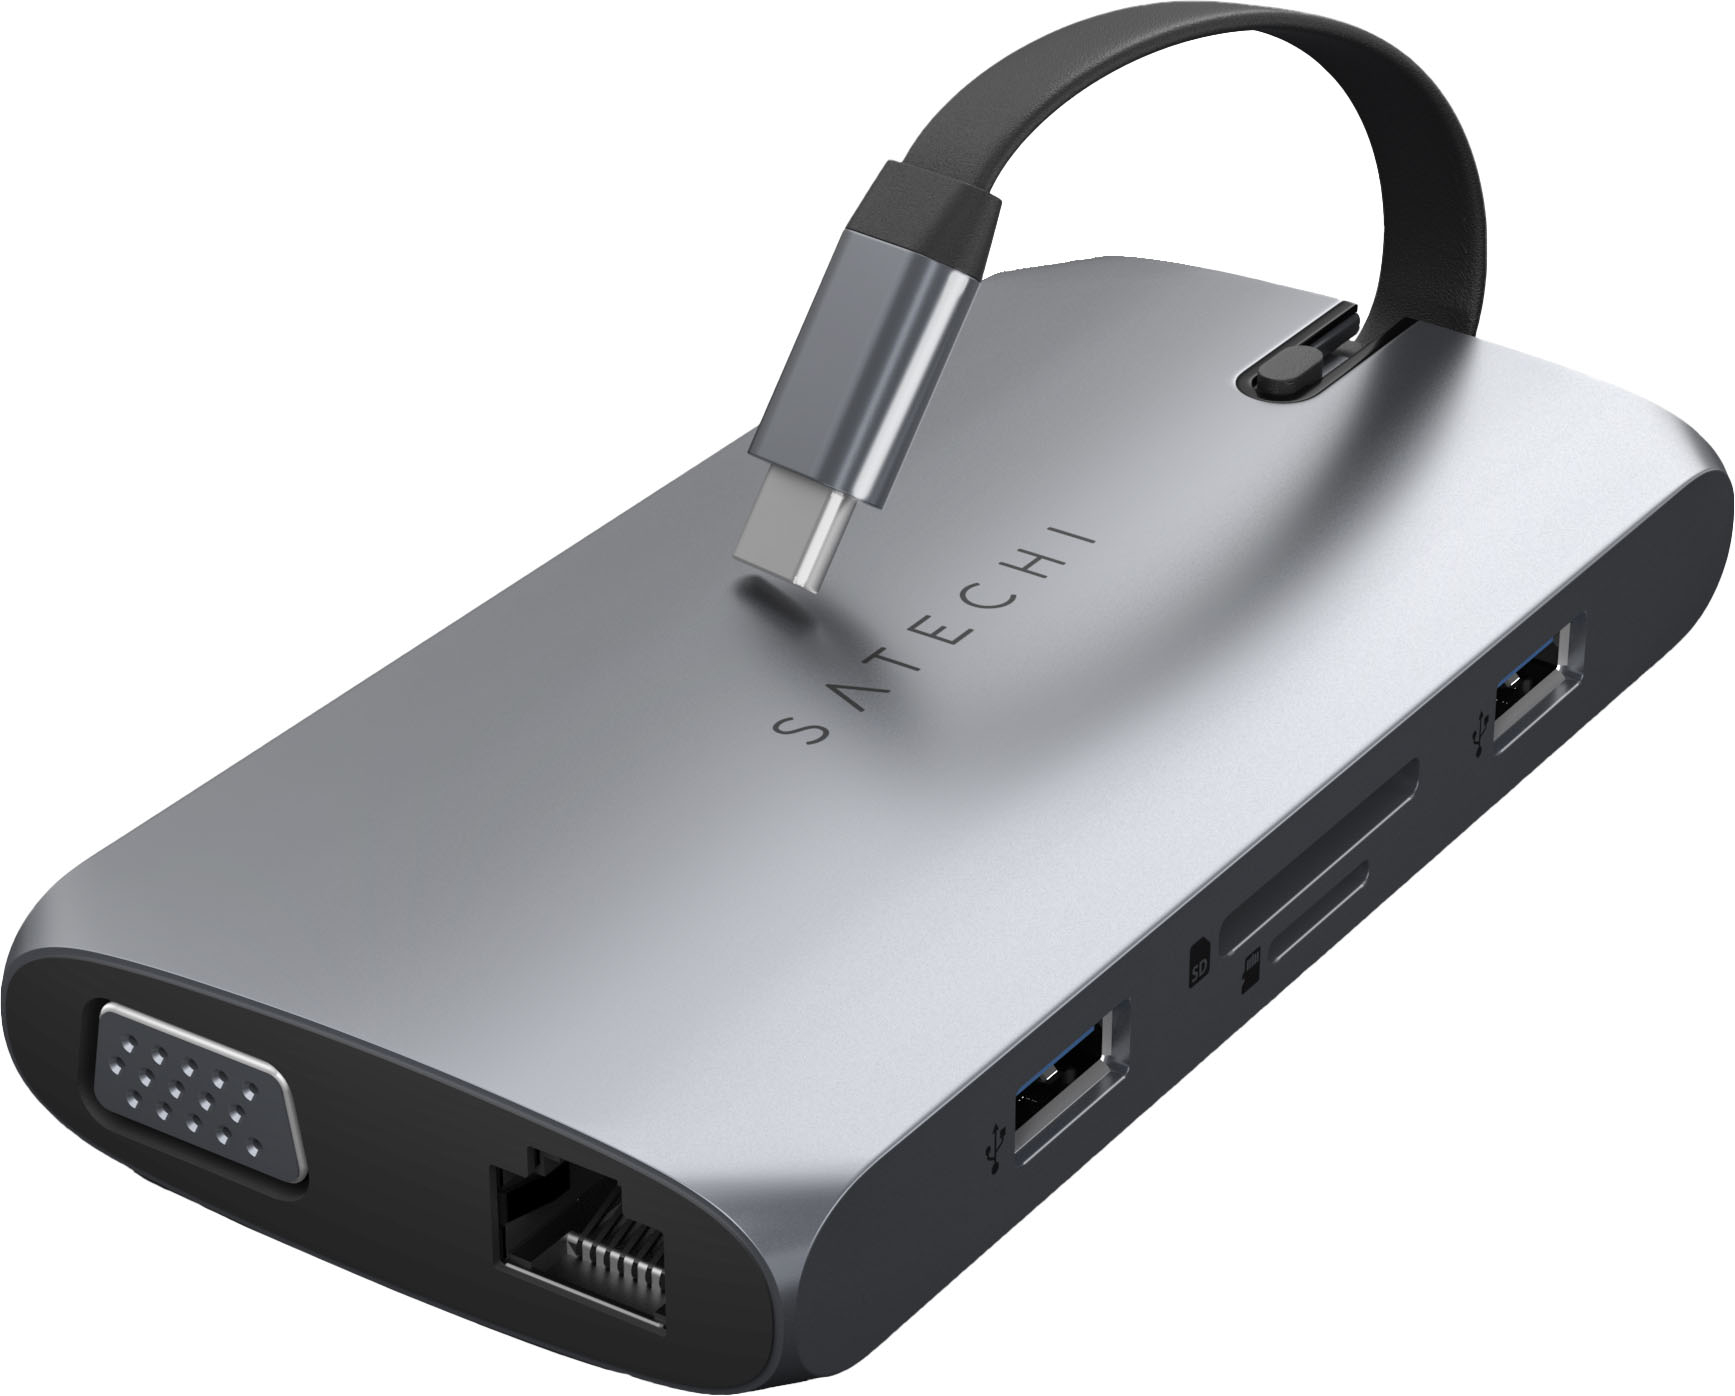 Angle View: Satechi - USB-C On-The-Go 9-in-1 Multiport Adapter - Space Gray